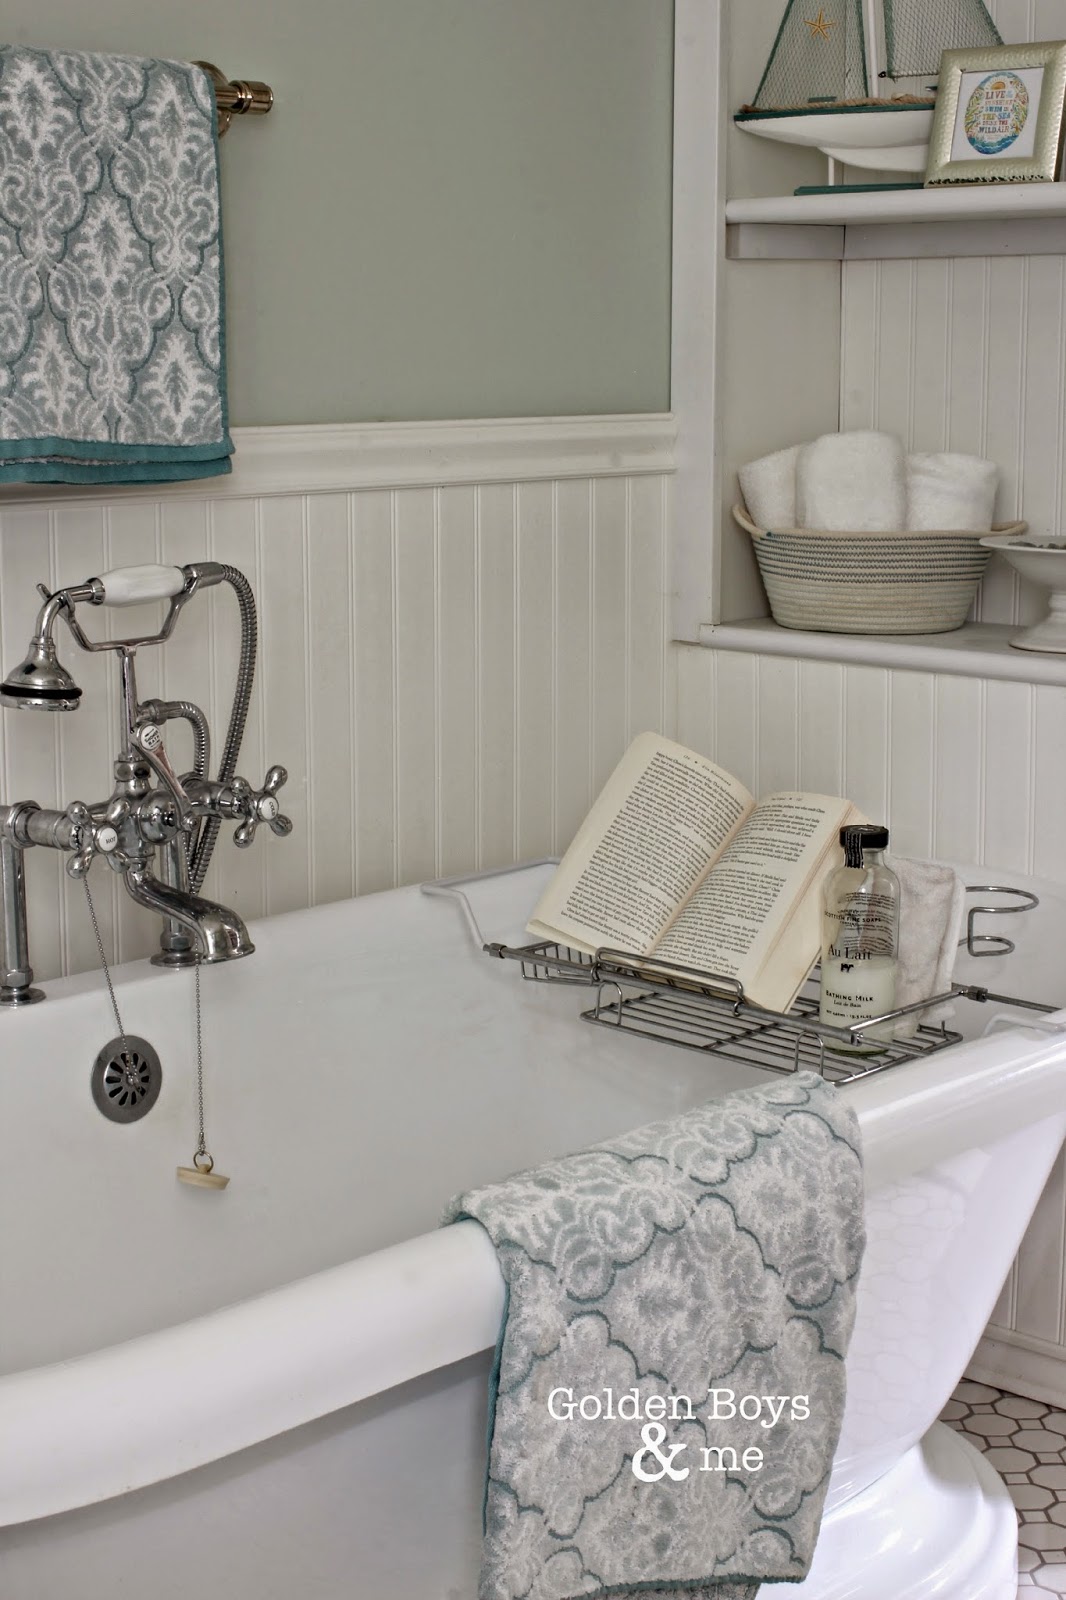 Pedestal tub with vintage style faucet and over the tub rack